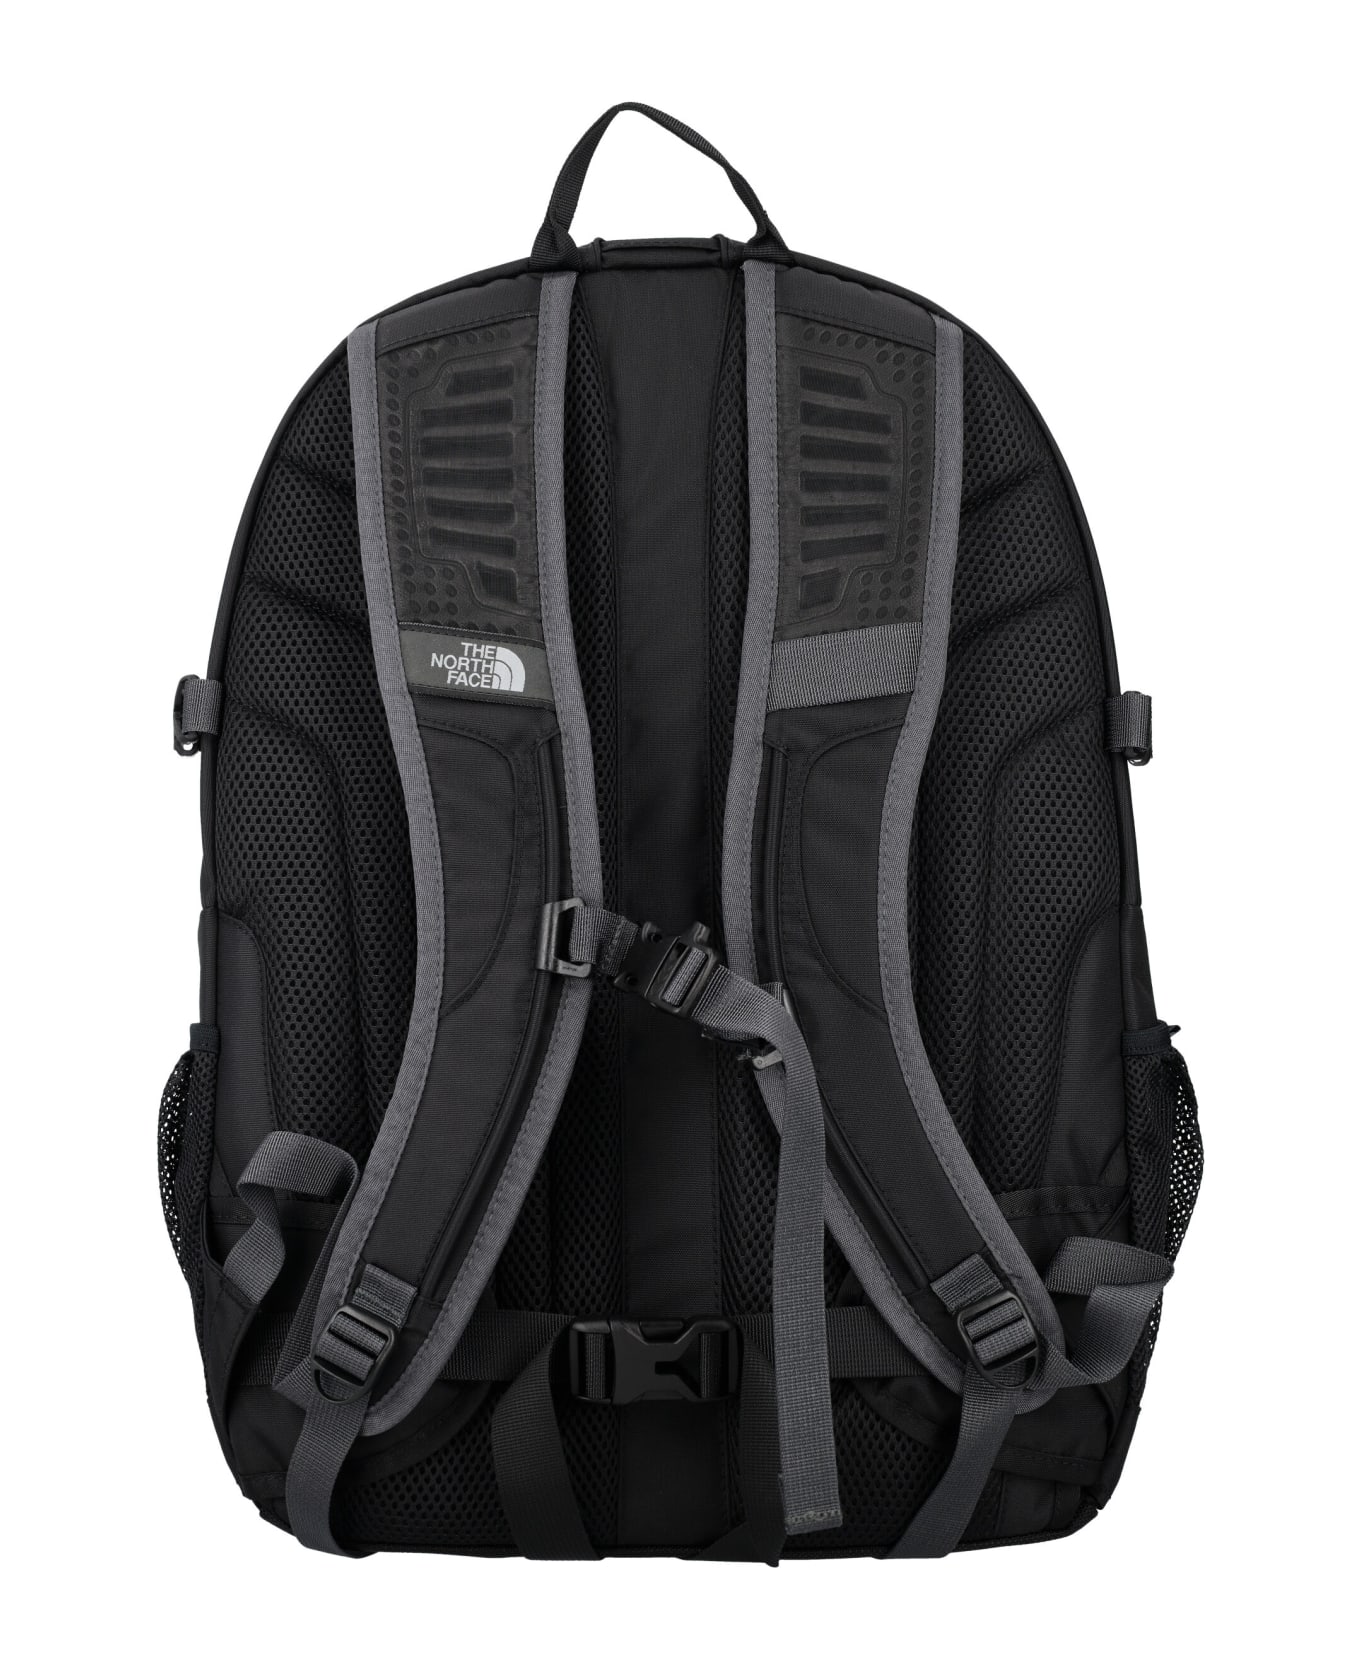 The North Face Borealis Classic Backpack - BLACK バックパック